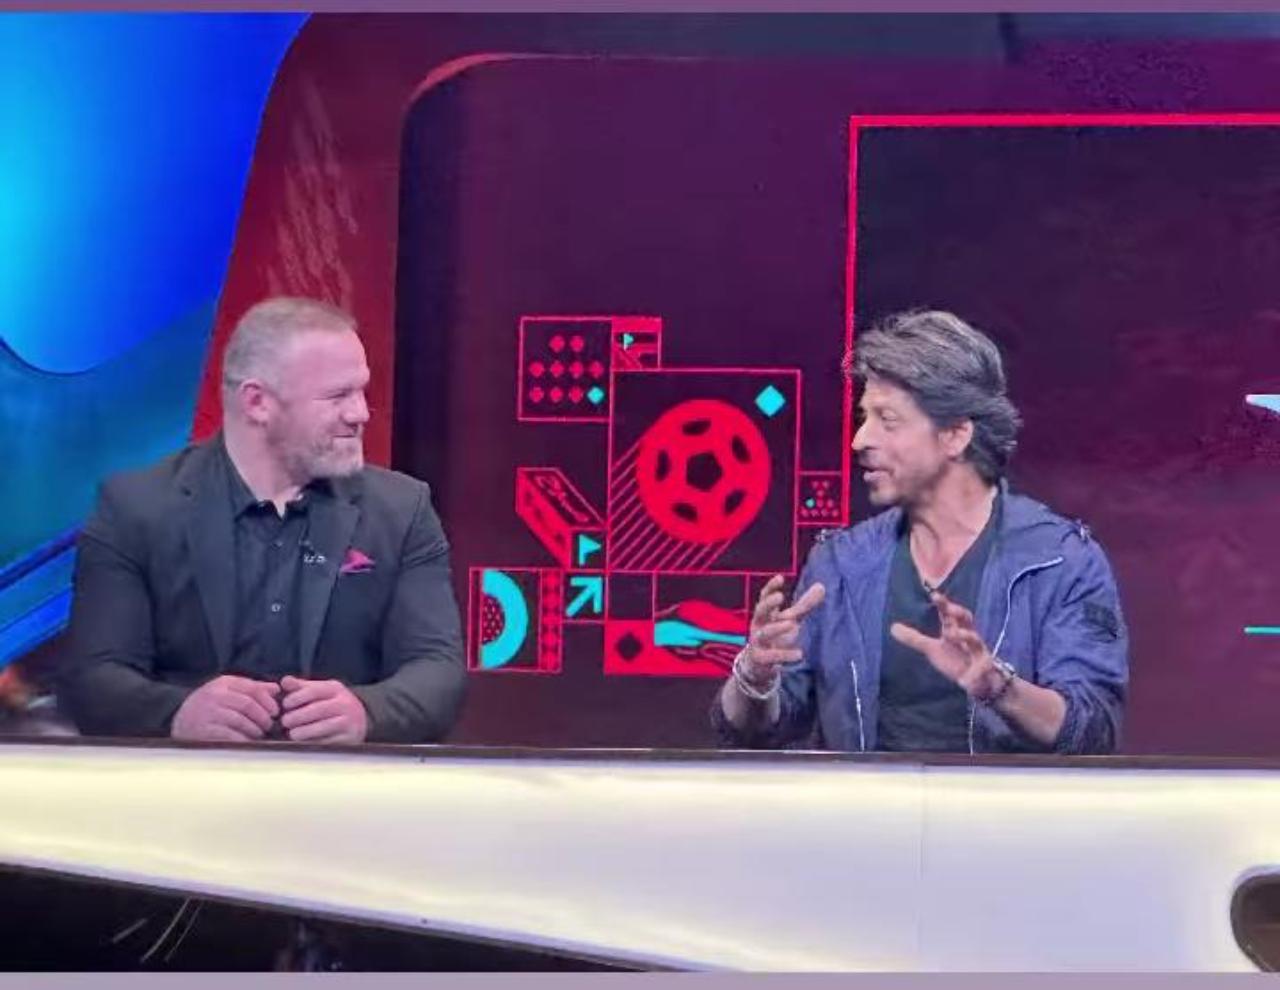 Shah Rukh Khan attended the pre-match interaction at Jio Studios along with Wayne Rooney. The actor promoted his upcoming film Pathaan and also talked football